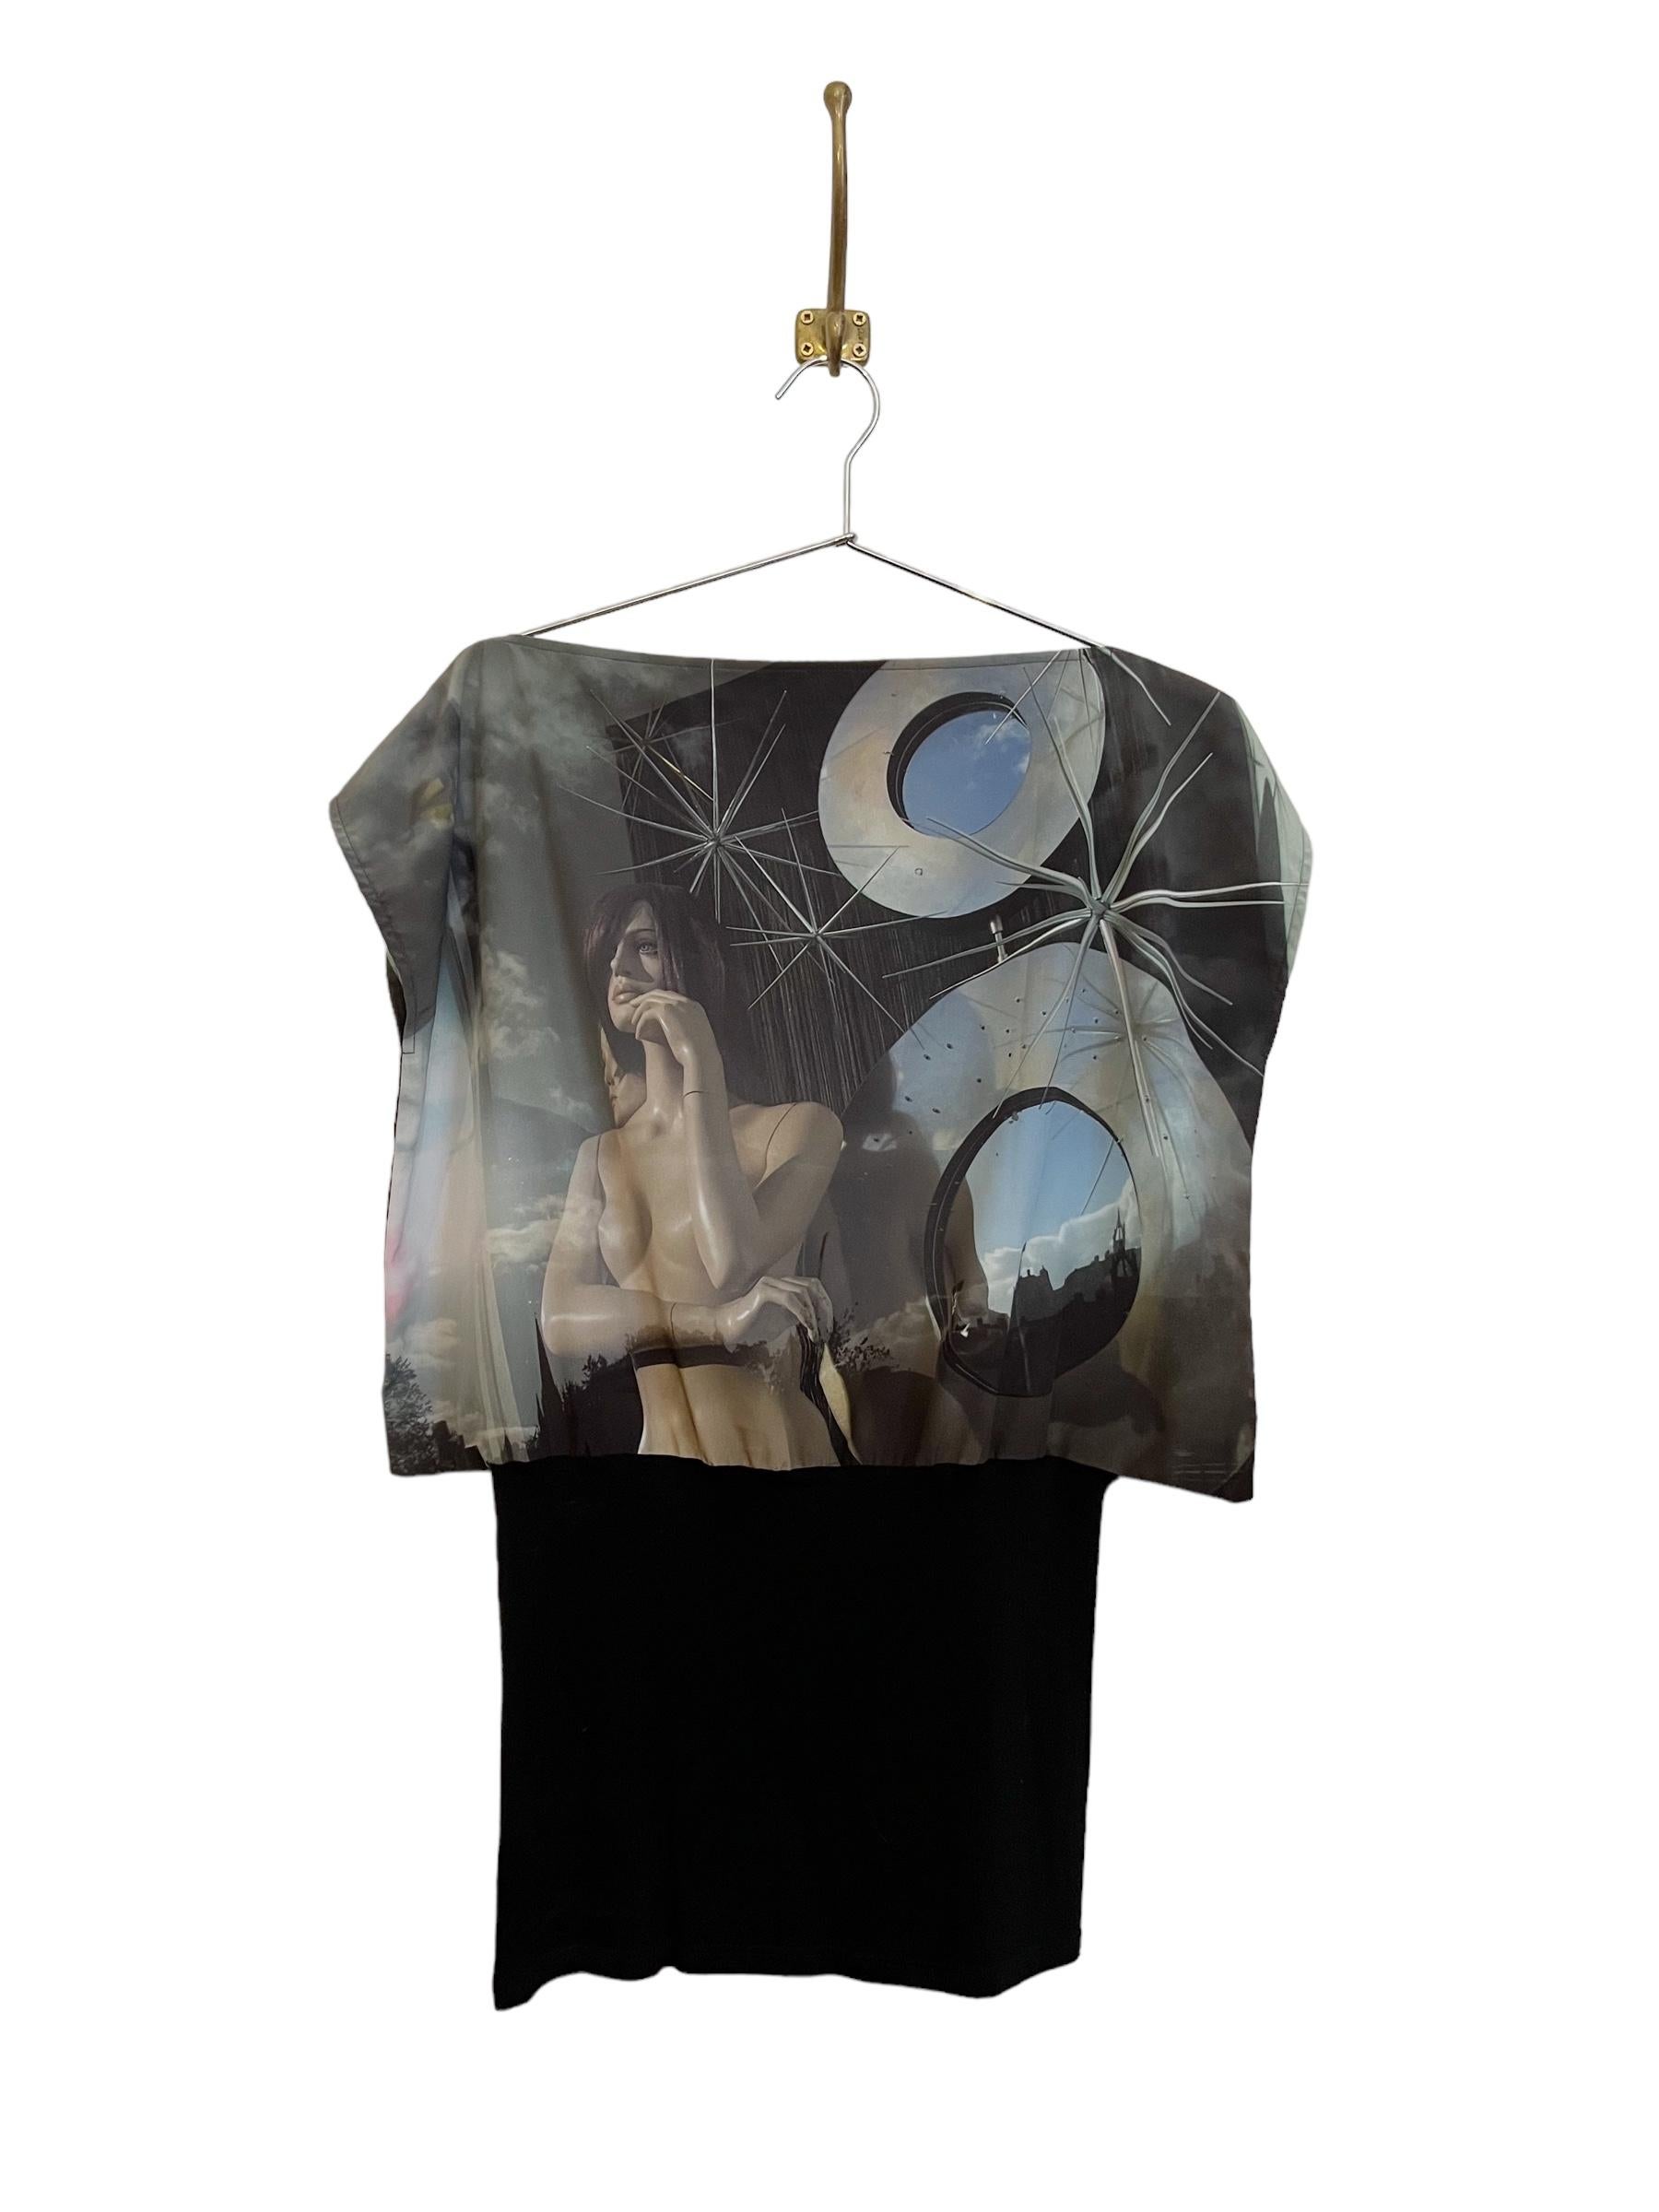 Epic Vintage Agnes B. Slouchy Top featuring photographic printed imagery of Shop display mannequins. 

MADE IN FRANCE

Features:
slit neckline
short sleeves
jersey panelled lower
upper Viscose

Sizing: 
Shoulder to shoulder: 24